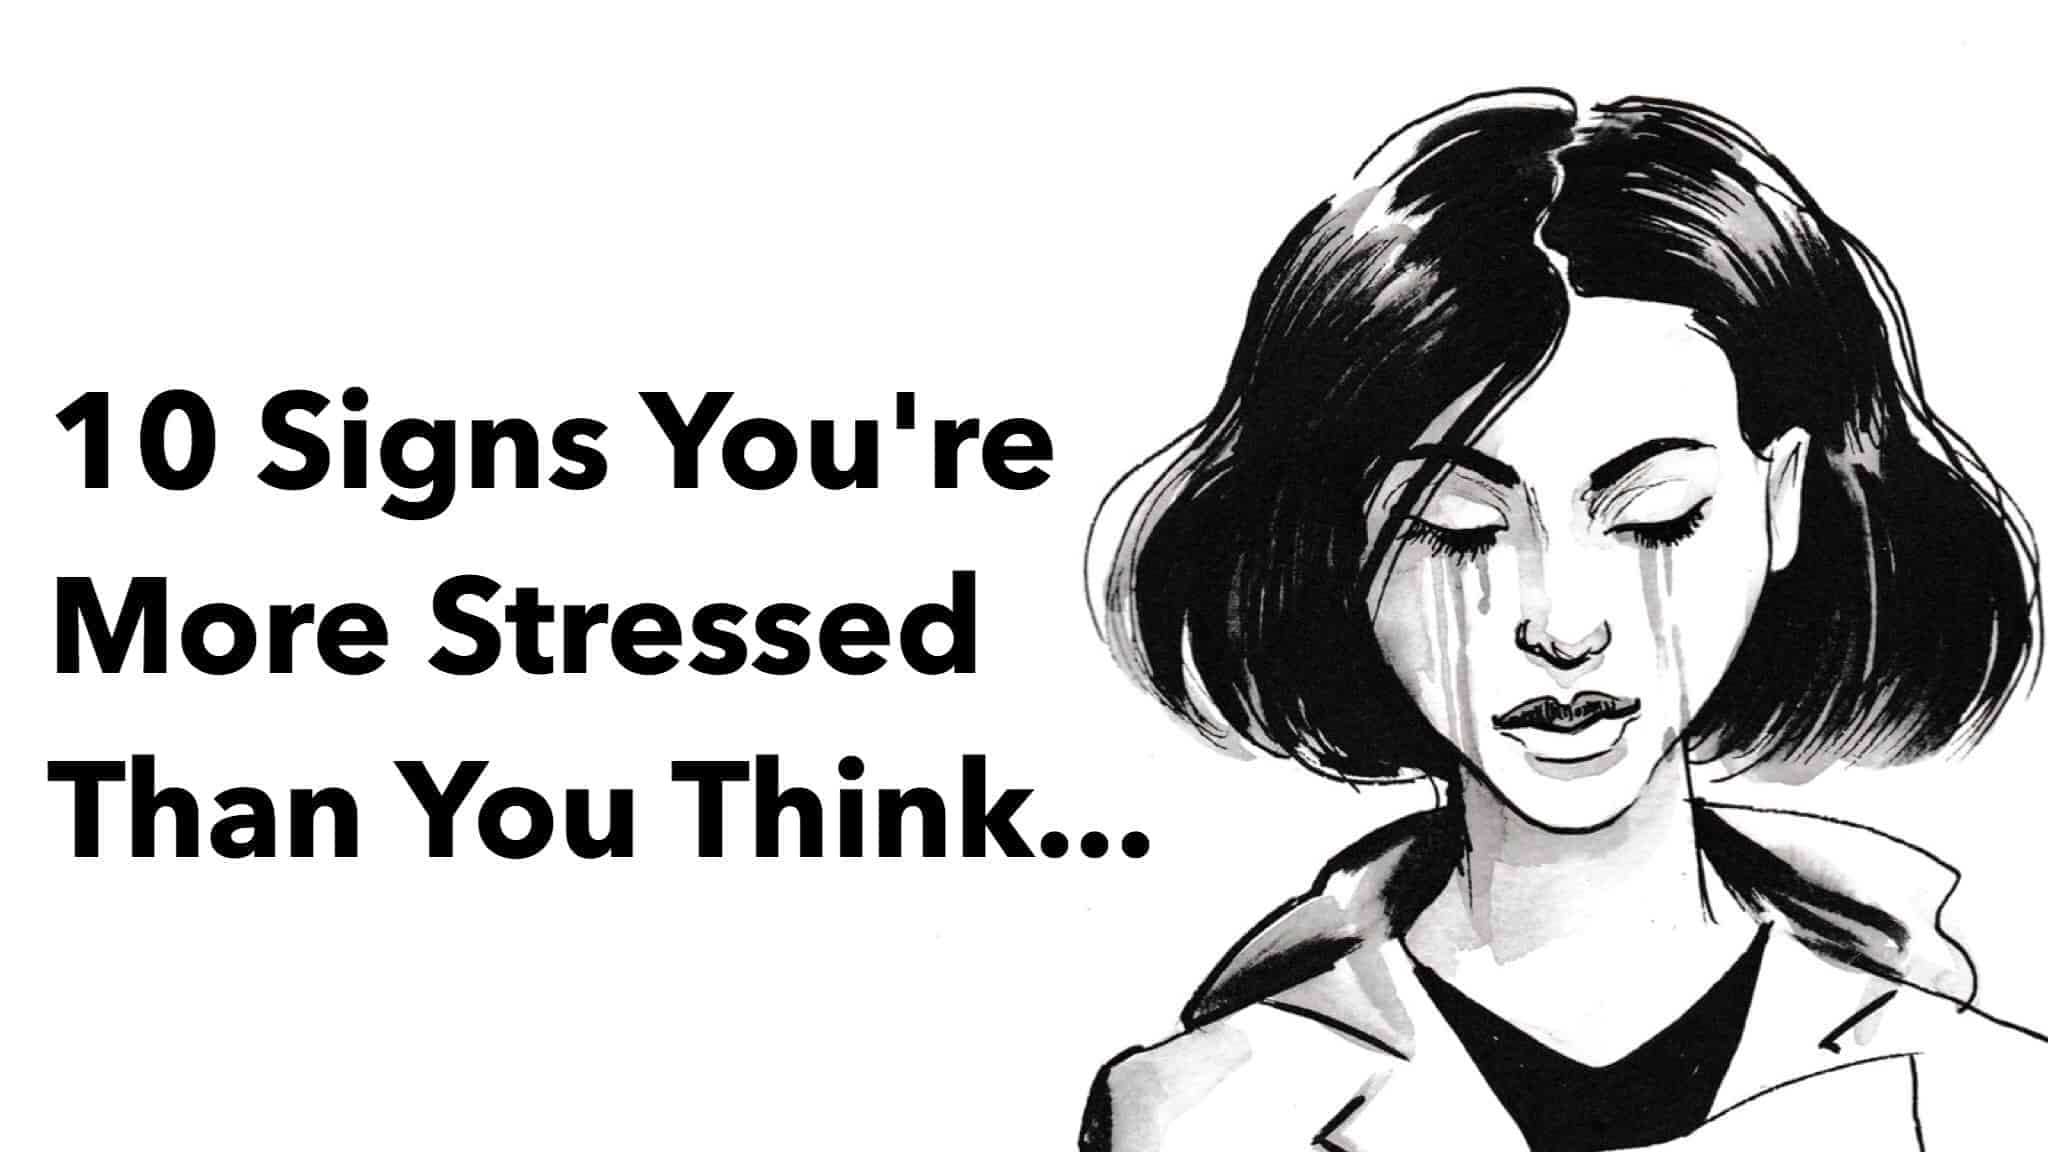 10 Signs You’re More Stressed Than You Think